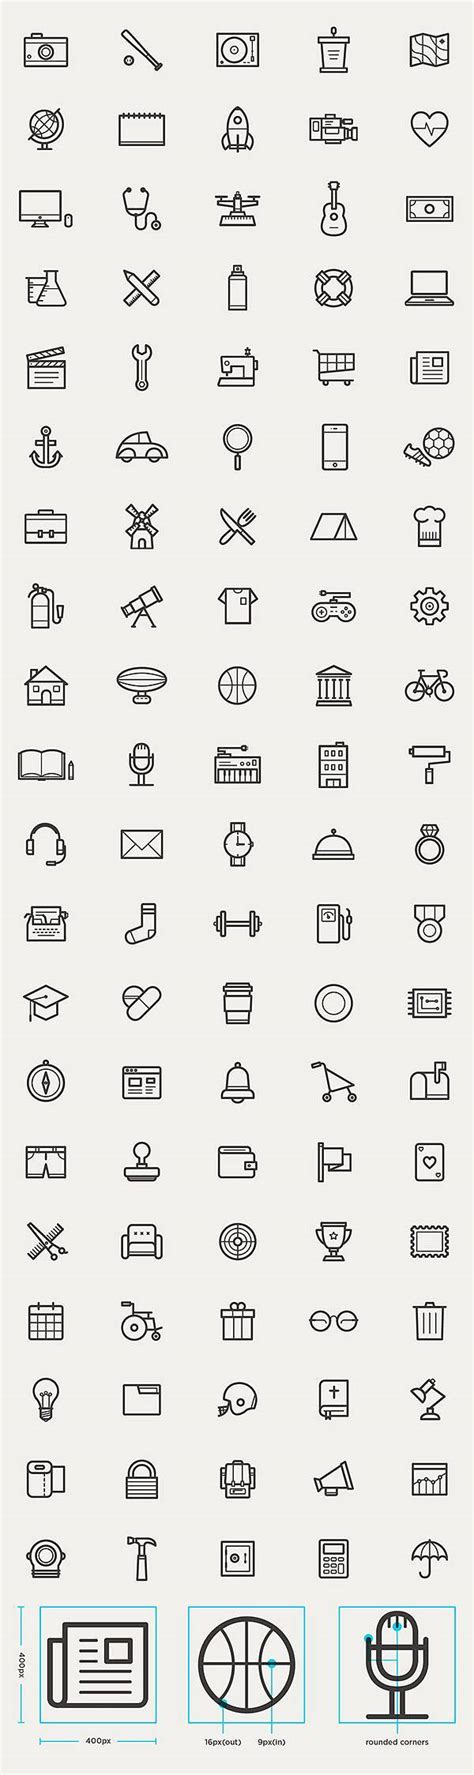 outline icons set  icons